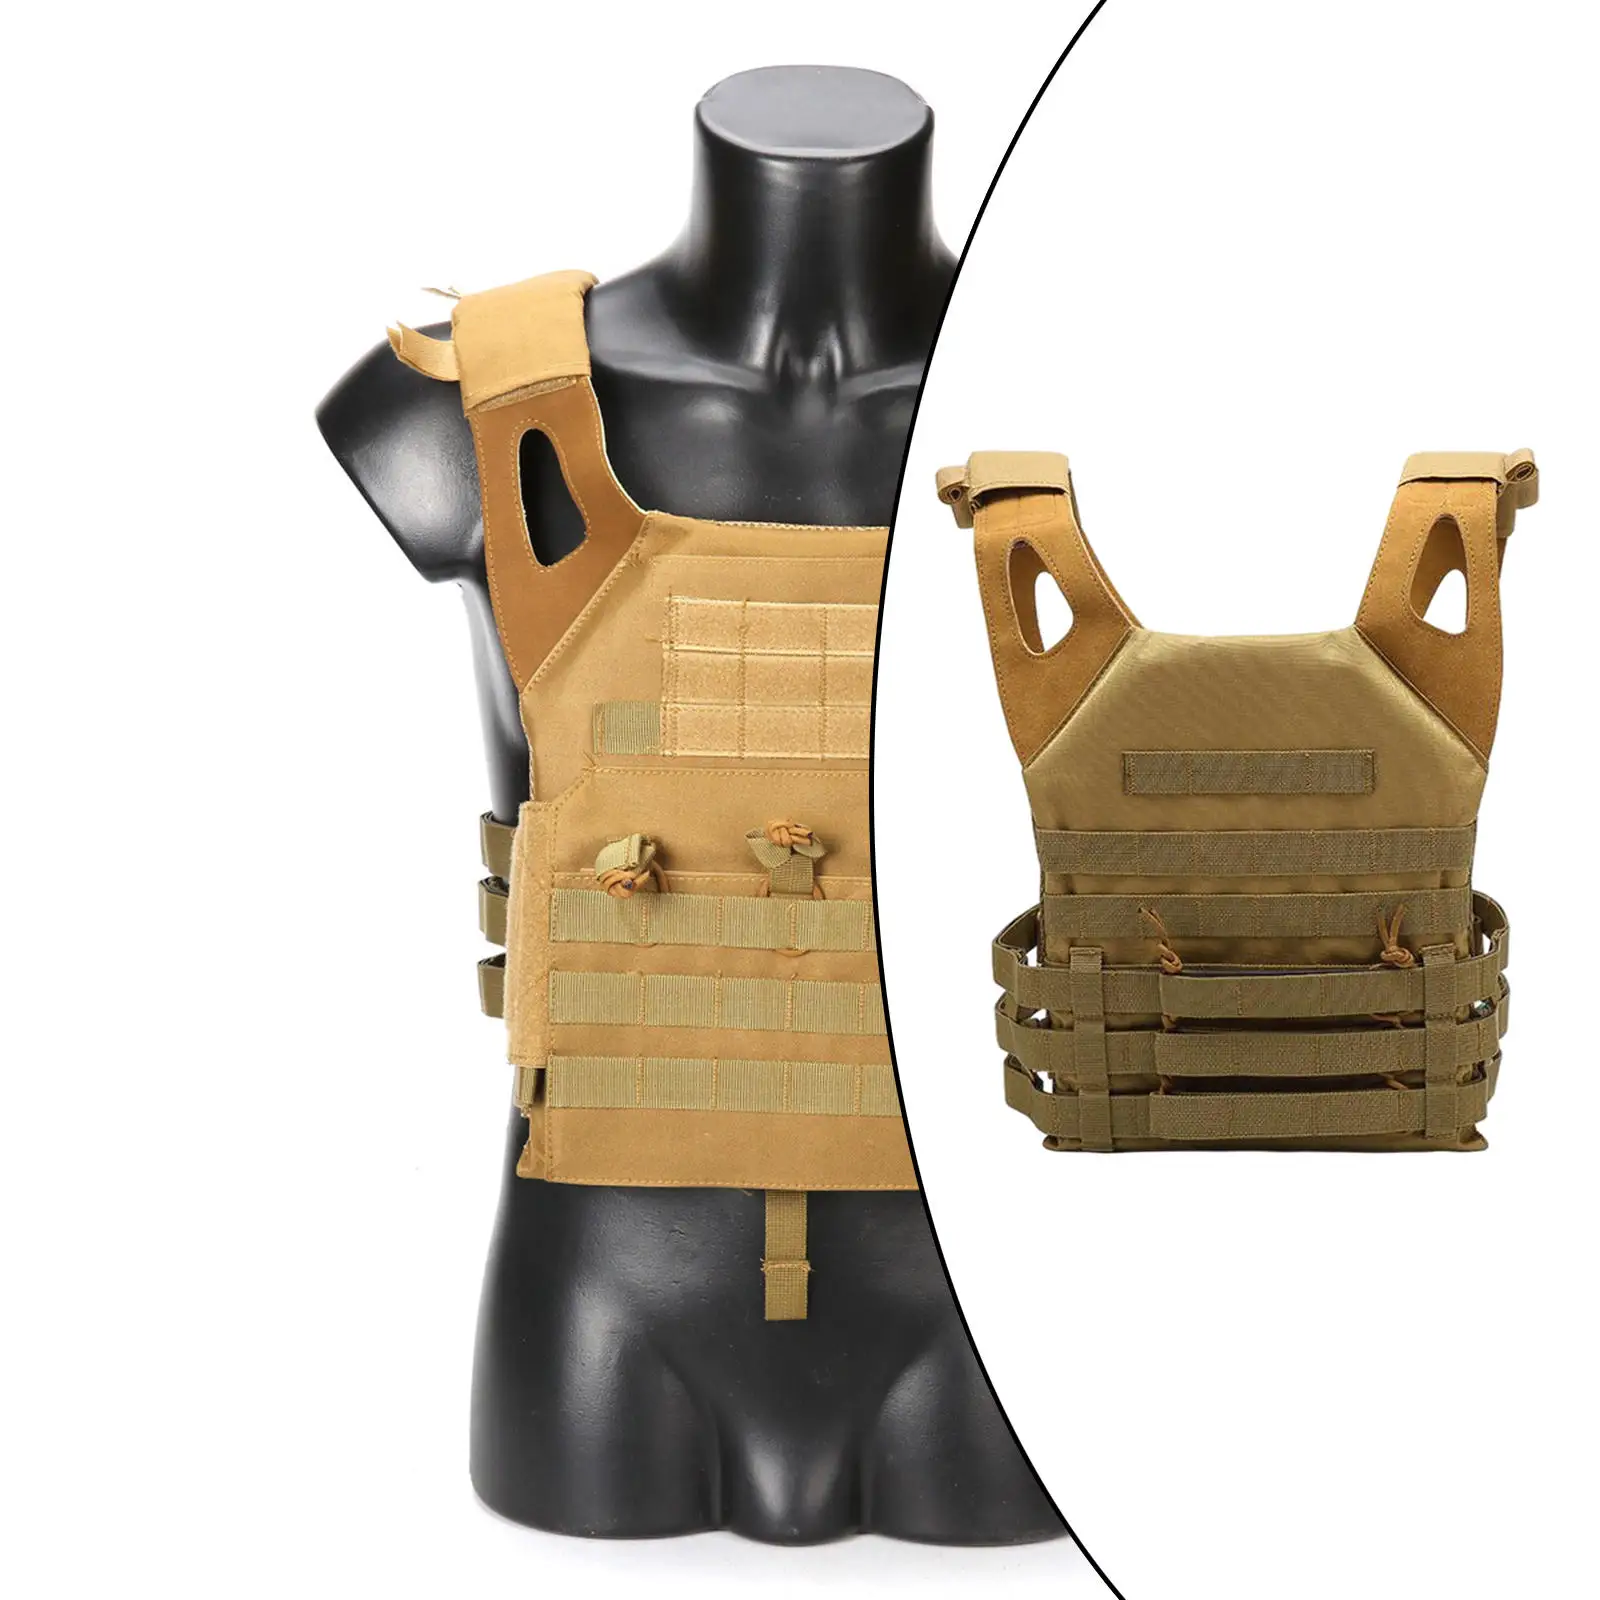  Breathable Military Lightweight Tactical Vest for Paintball Plate Carrier Magazine Games Training CS Hunting